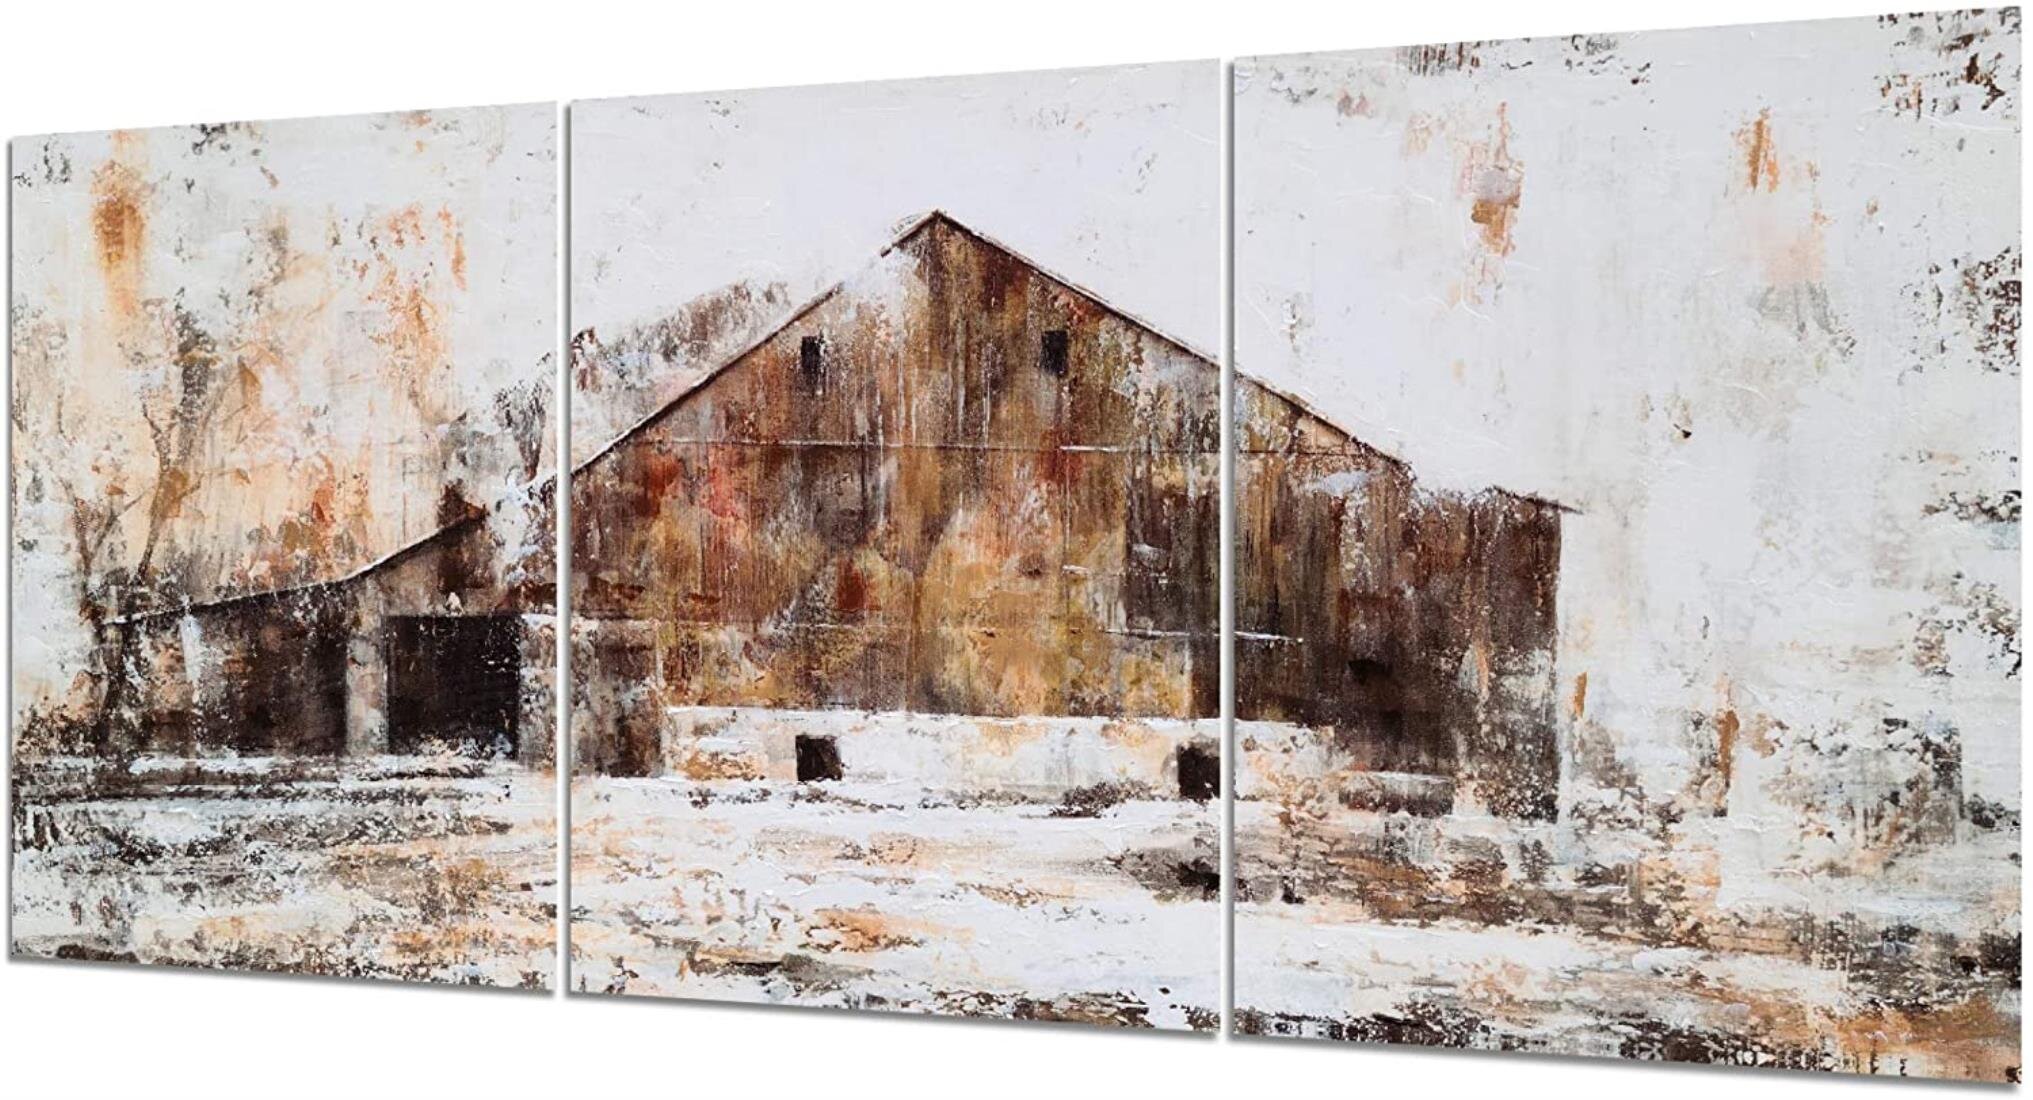 Barnhouse Friends HD Canvas prints Painting Home decor Picture Wall art 16"x28"